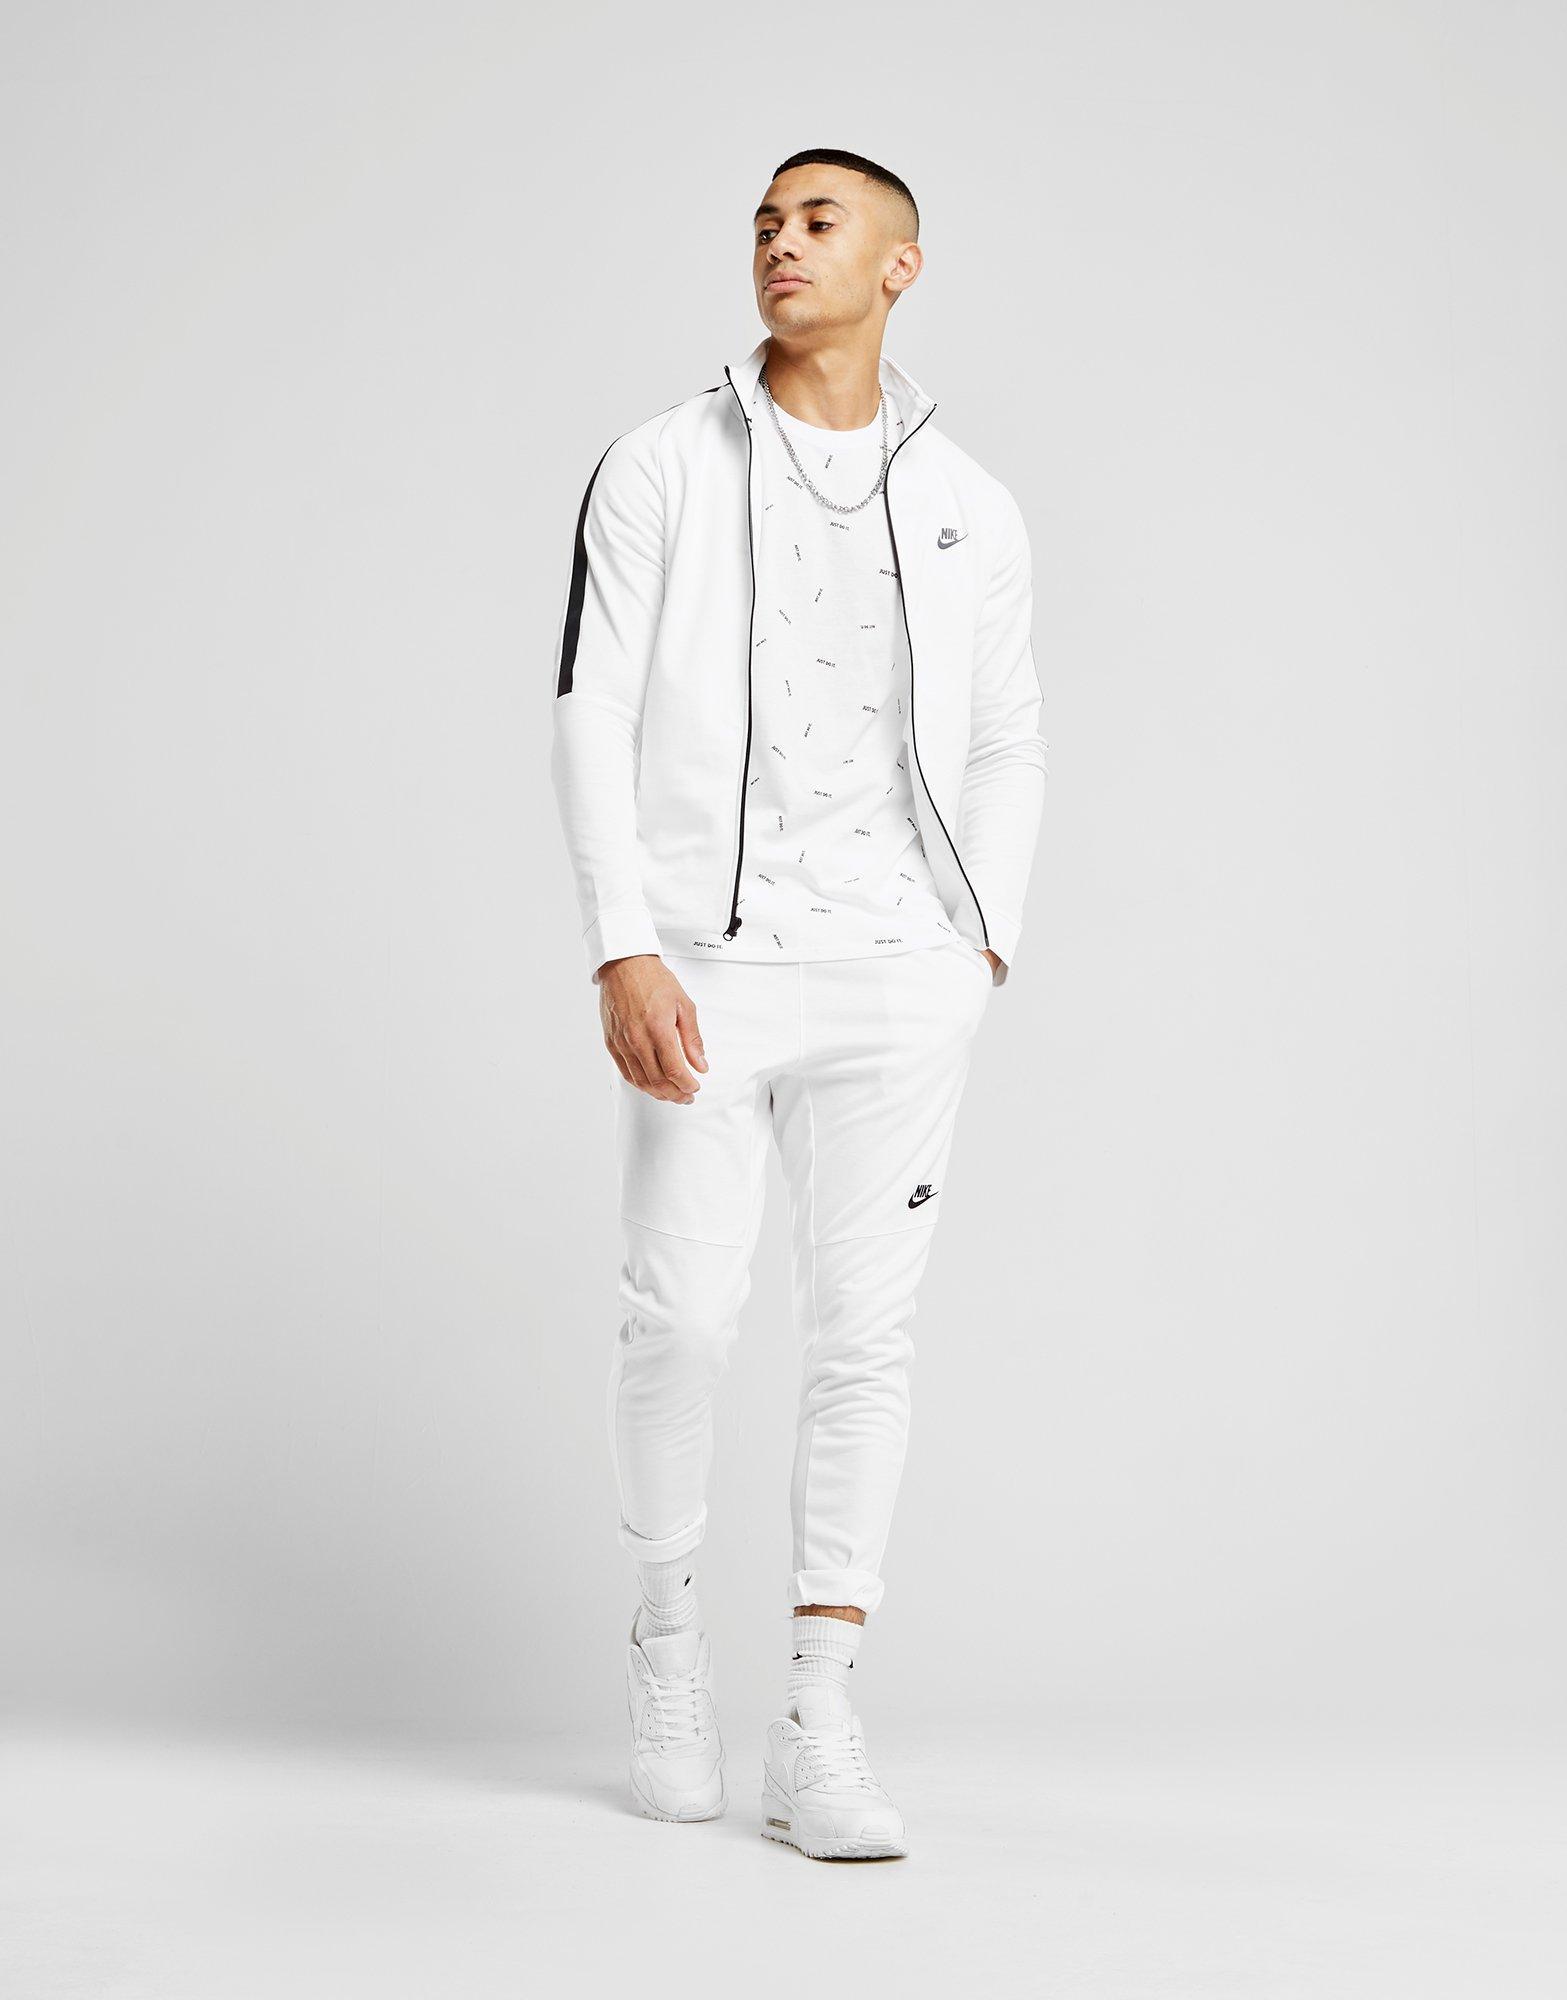 Pamflet De stad Lunch Nike Tribute Hoodie White Shop, SAVE 50% - icarus.photos